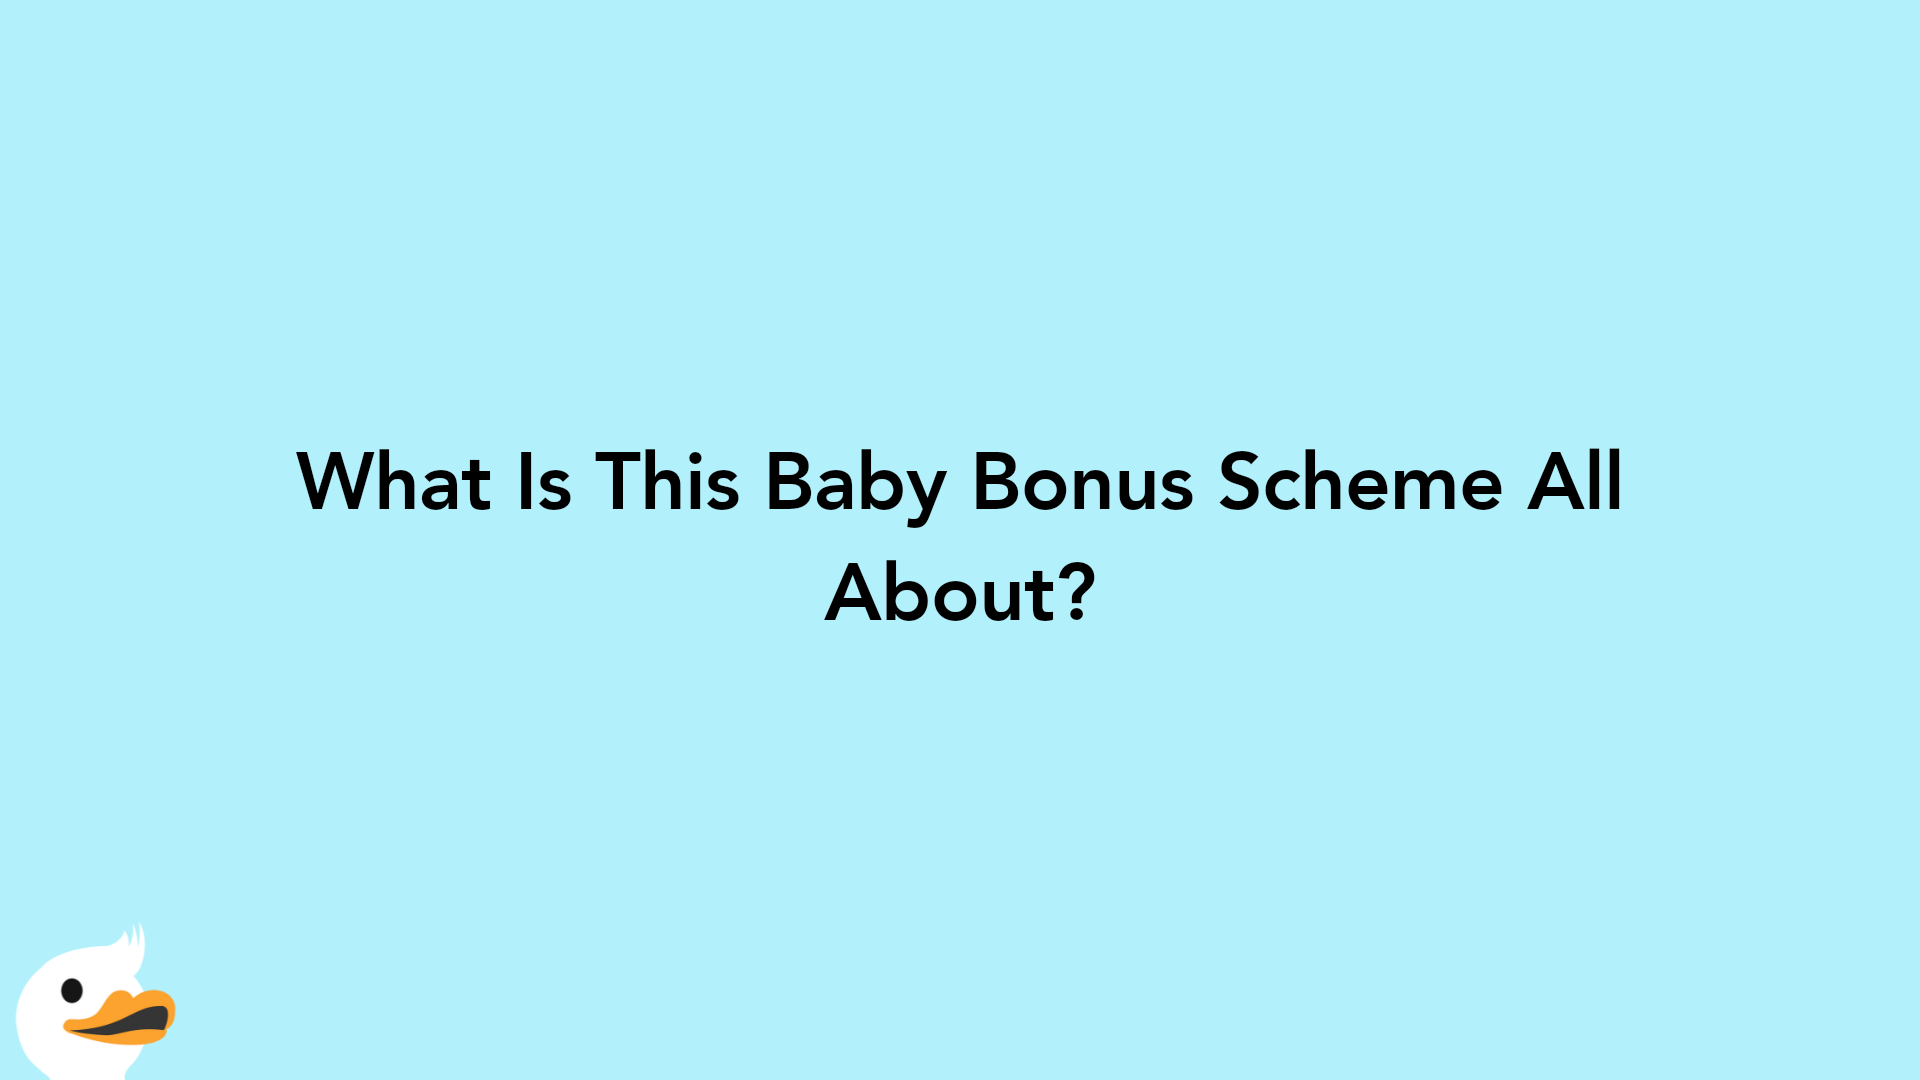 What Is This Baby Bonus Scheme All About?